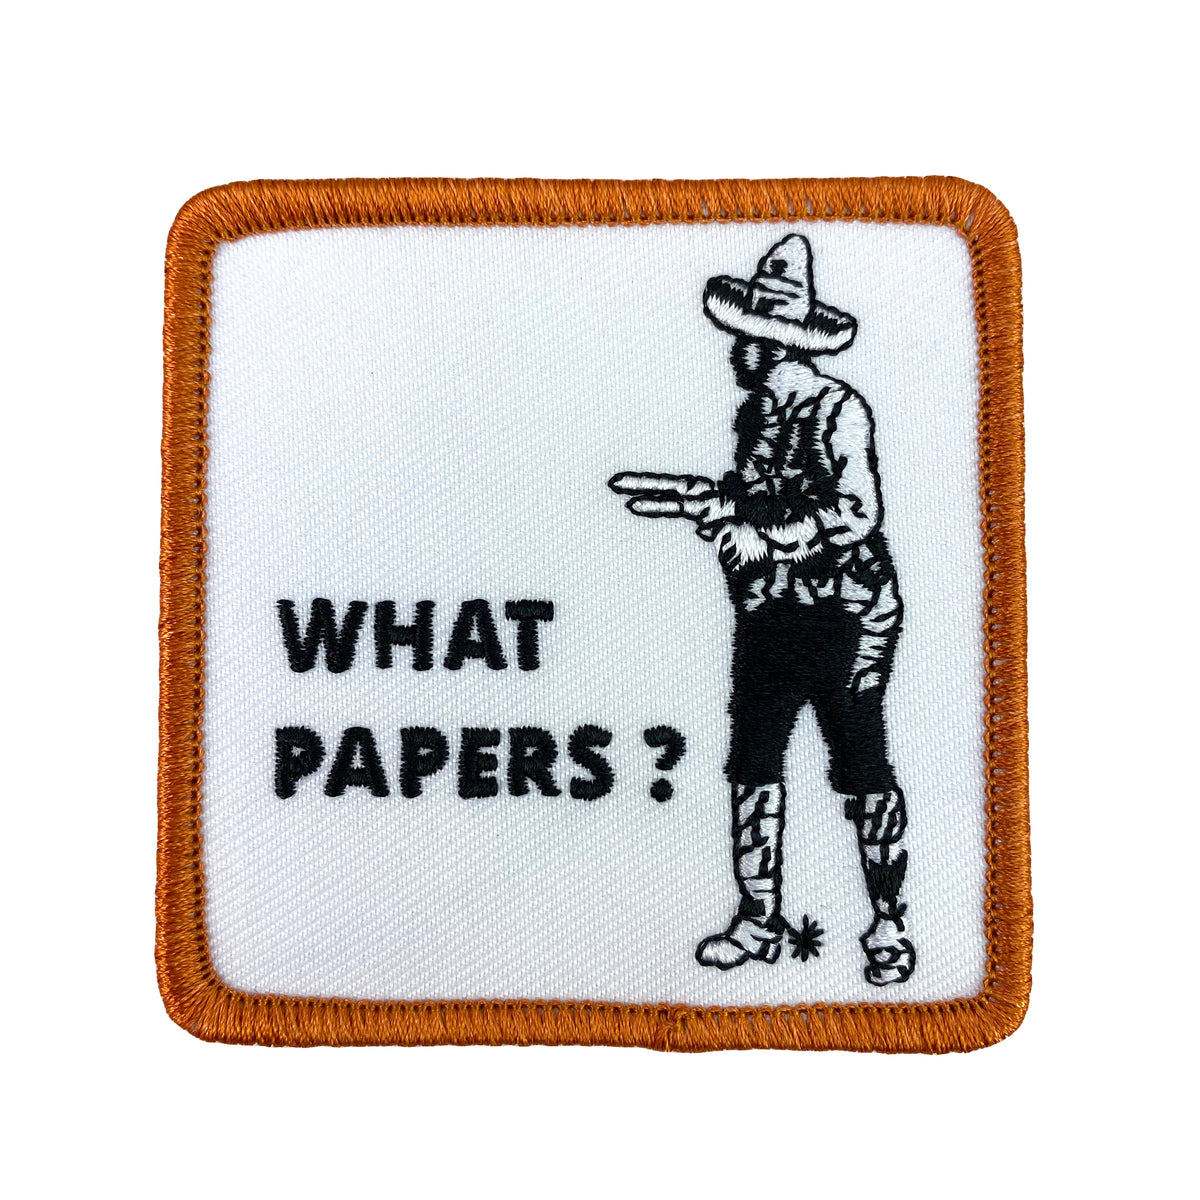 WHAT PAPERS